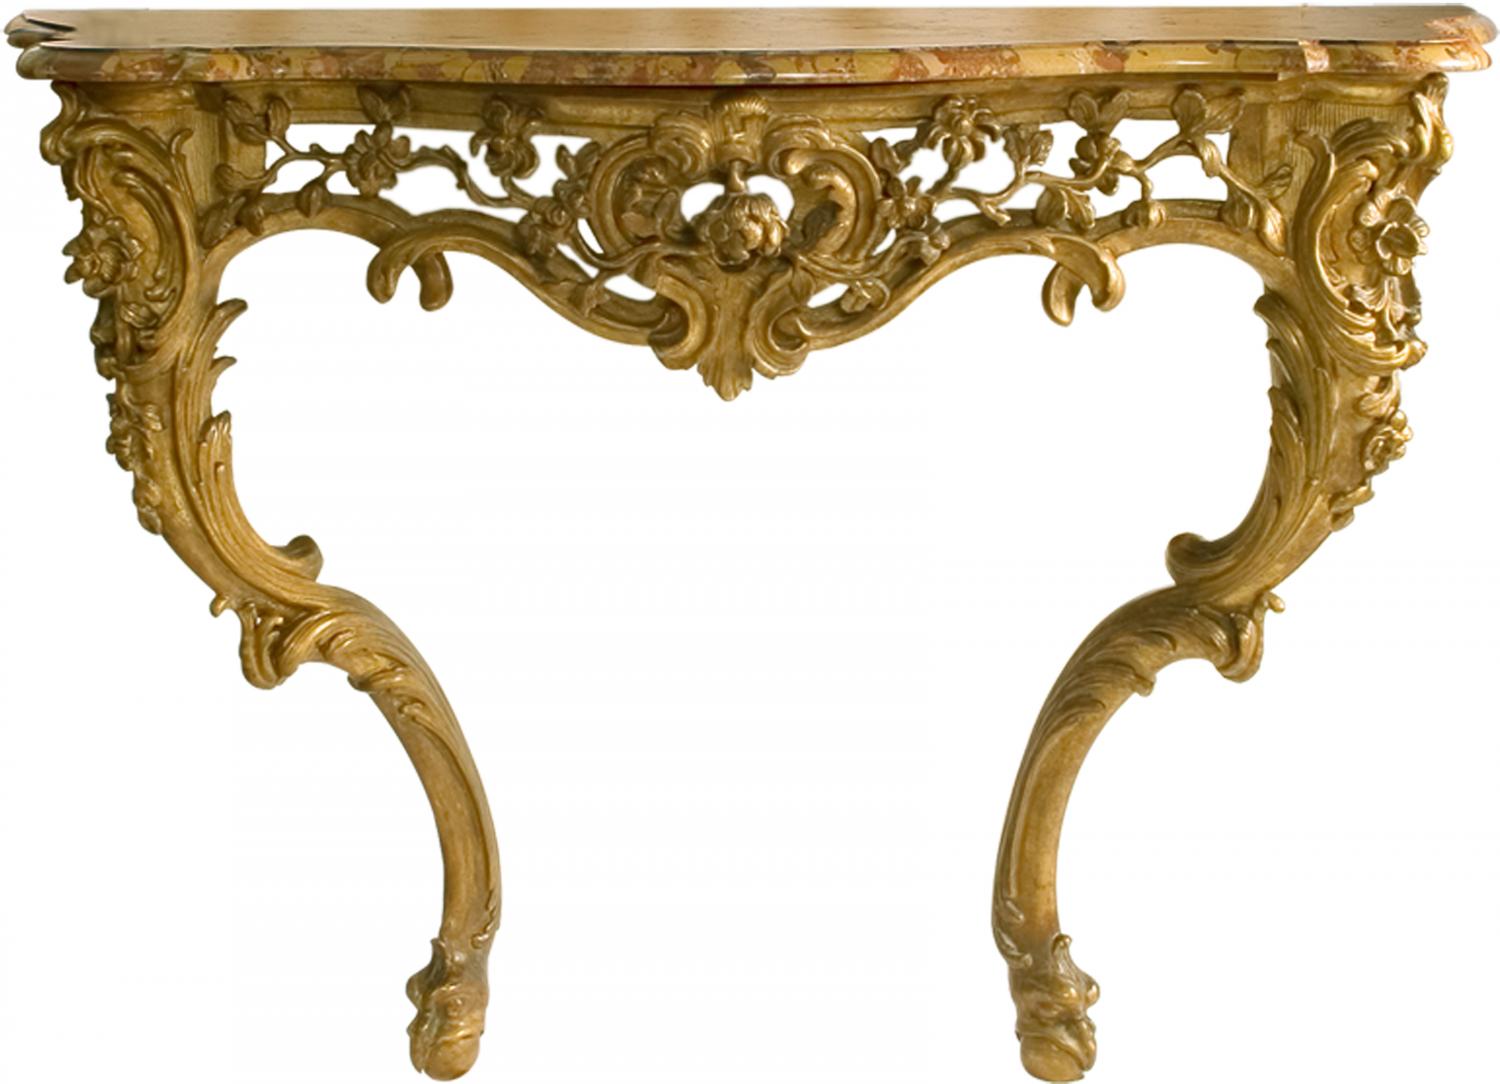 ANTIQUE FURNITURE | VINTAGE FURNITURE | FRENCH COUNTRY FURNITURE